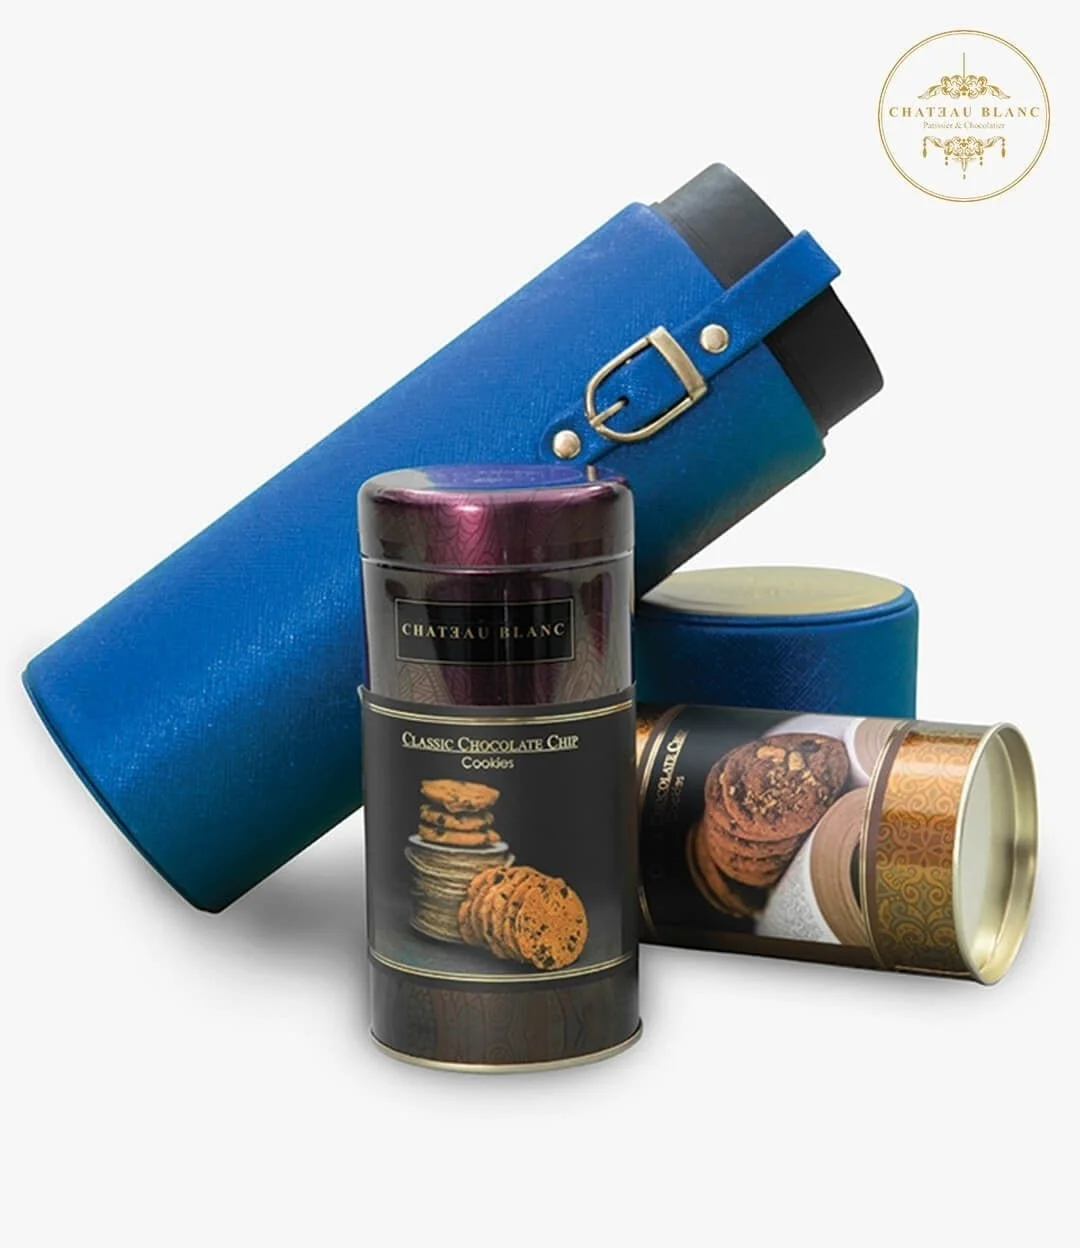 Cookies Fancy Box by Chateau Blanc - 2 Cylindrical Packs 